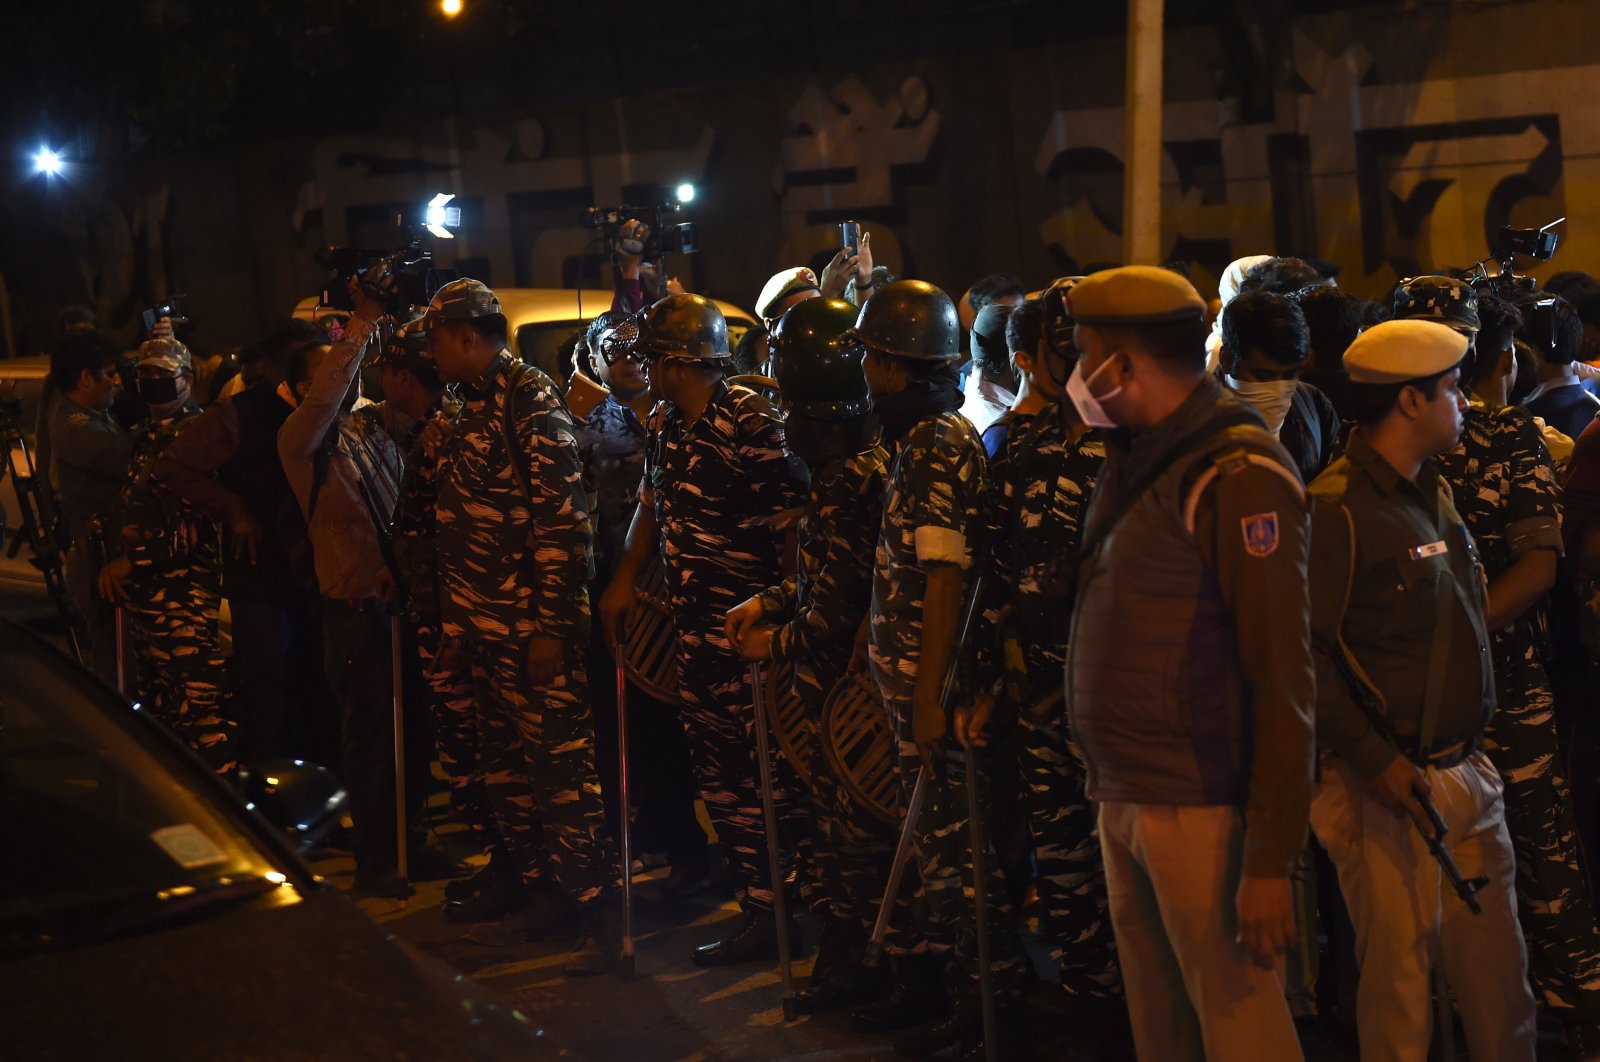 Indian security forces stand outside the gates of Tihar Jail, New Delhi, March 20, 2020. (AFP Photo)